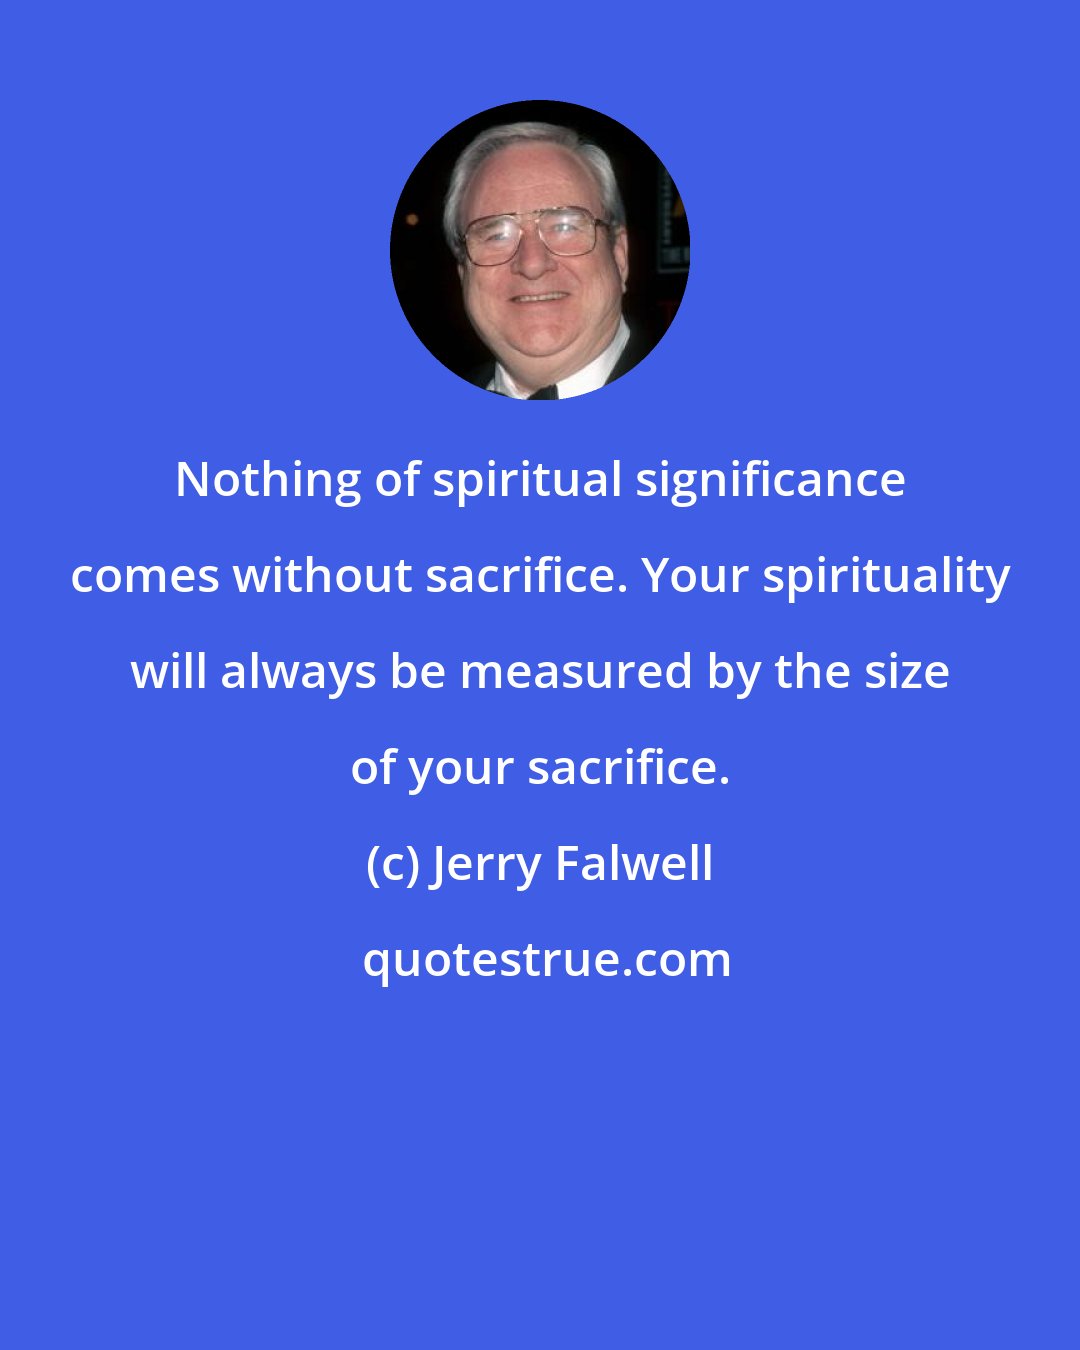 Jerry Falwell: Nothing of spiritual significance comes without sacrifice. Your spirituality will always be measured by the size of your sacrifice.